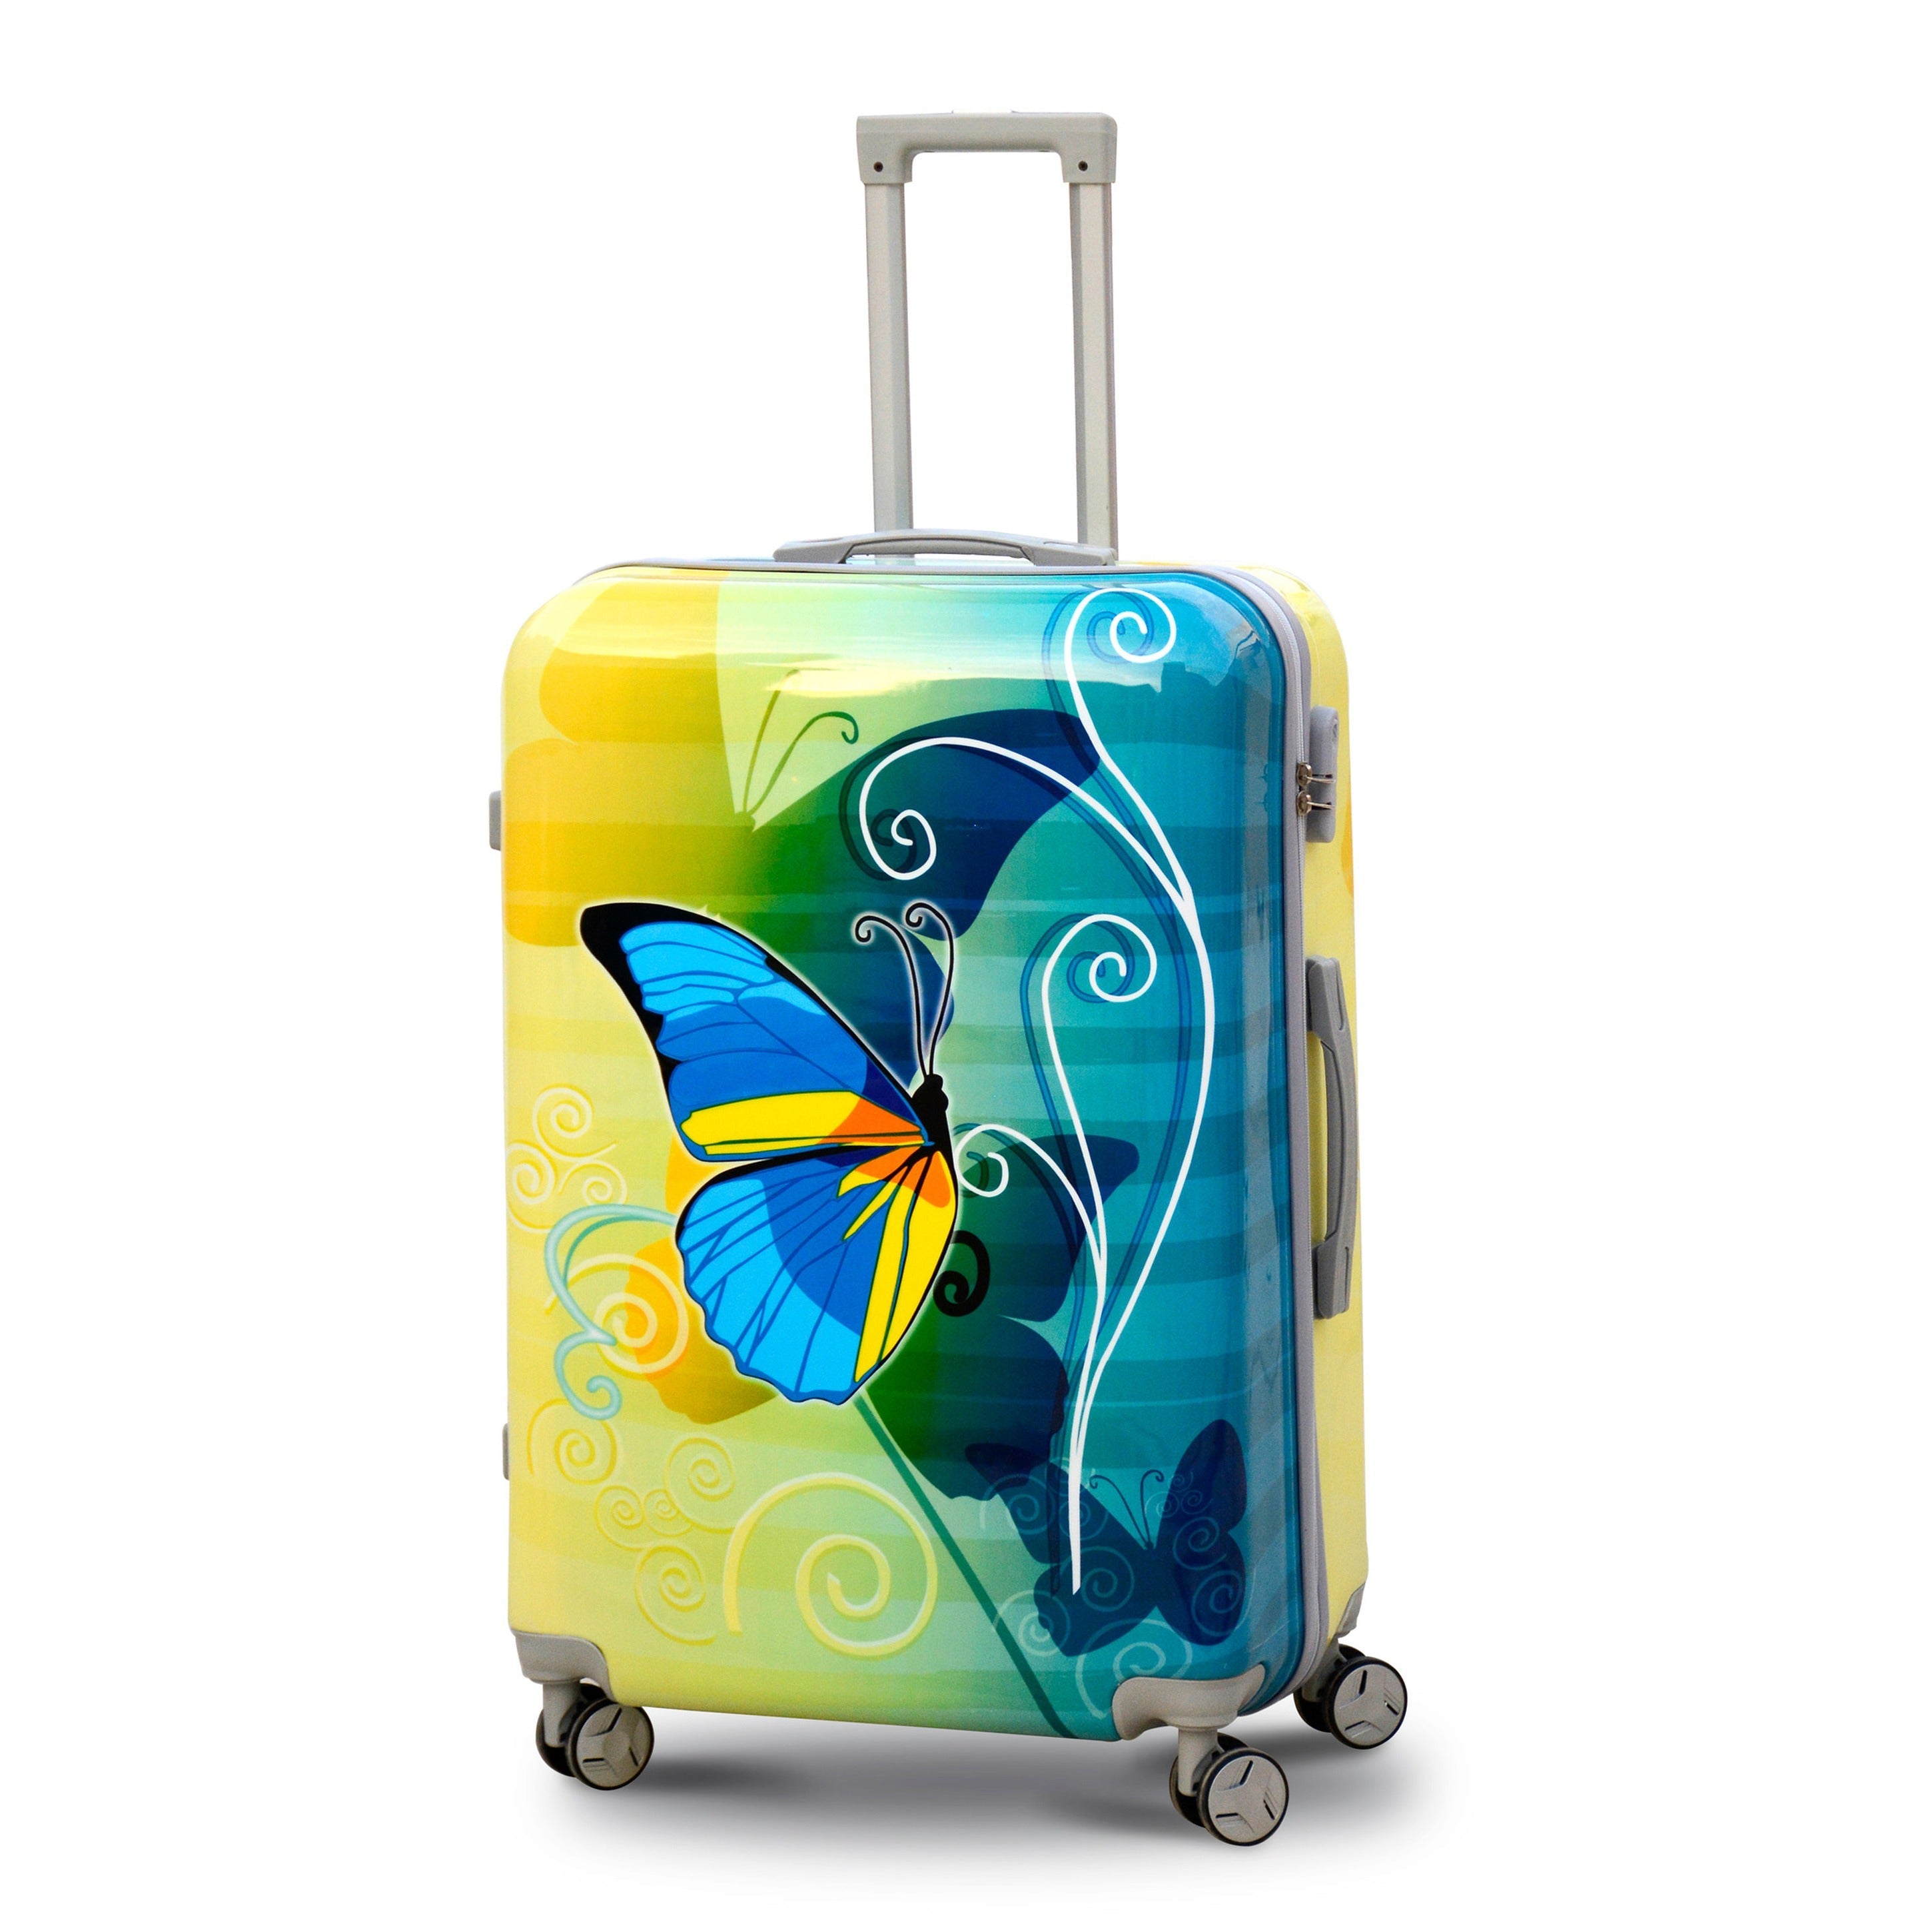 24" Green Colour Printed Butterfly Lightweight ABS Luggage | Hard Case Trolley Bag